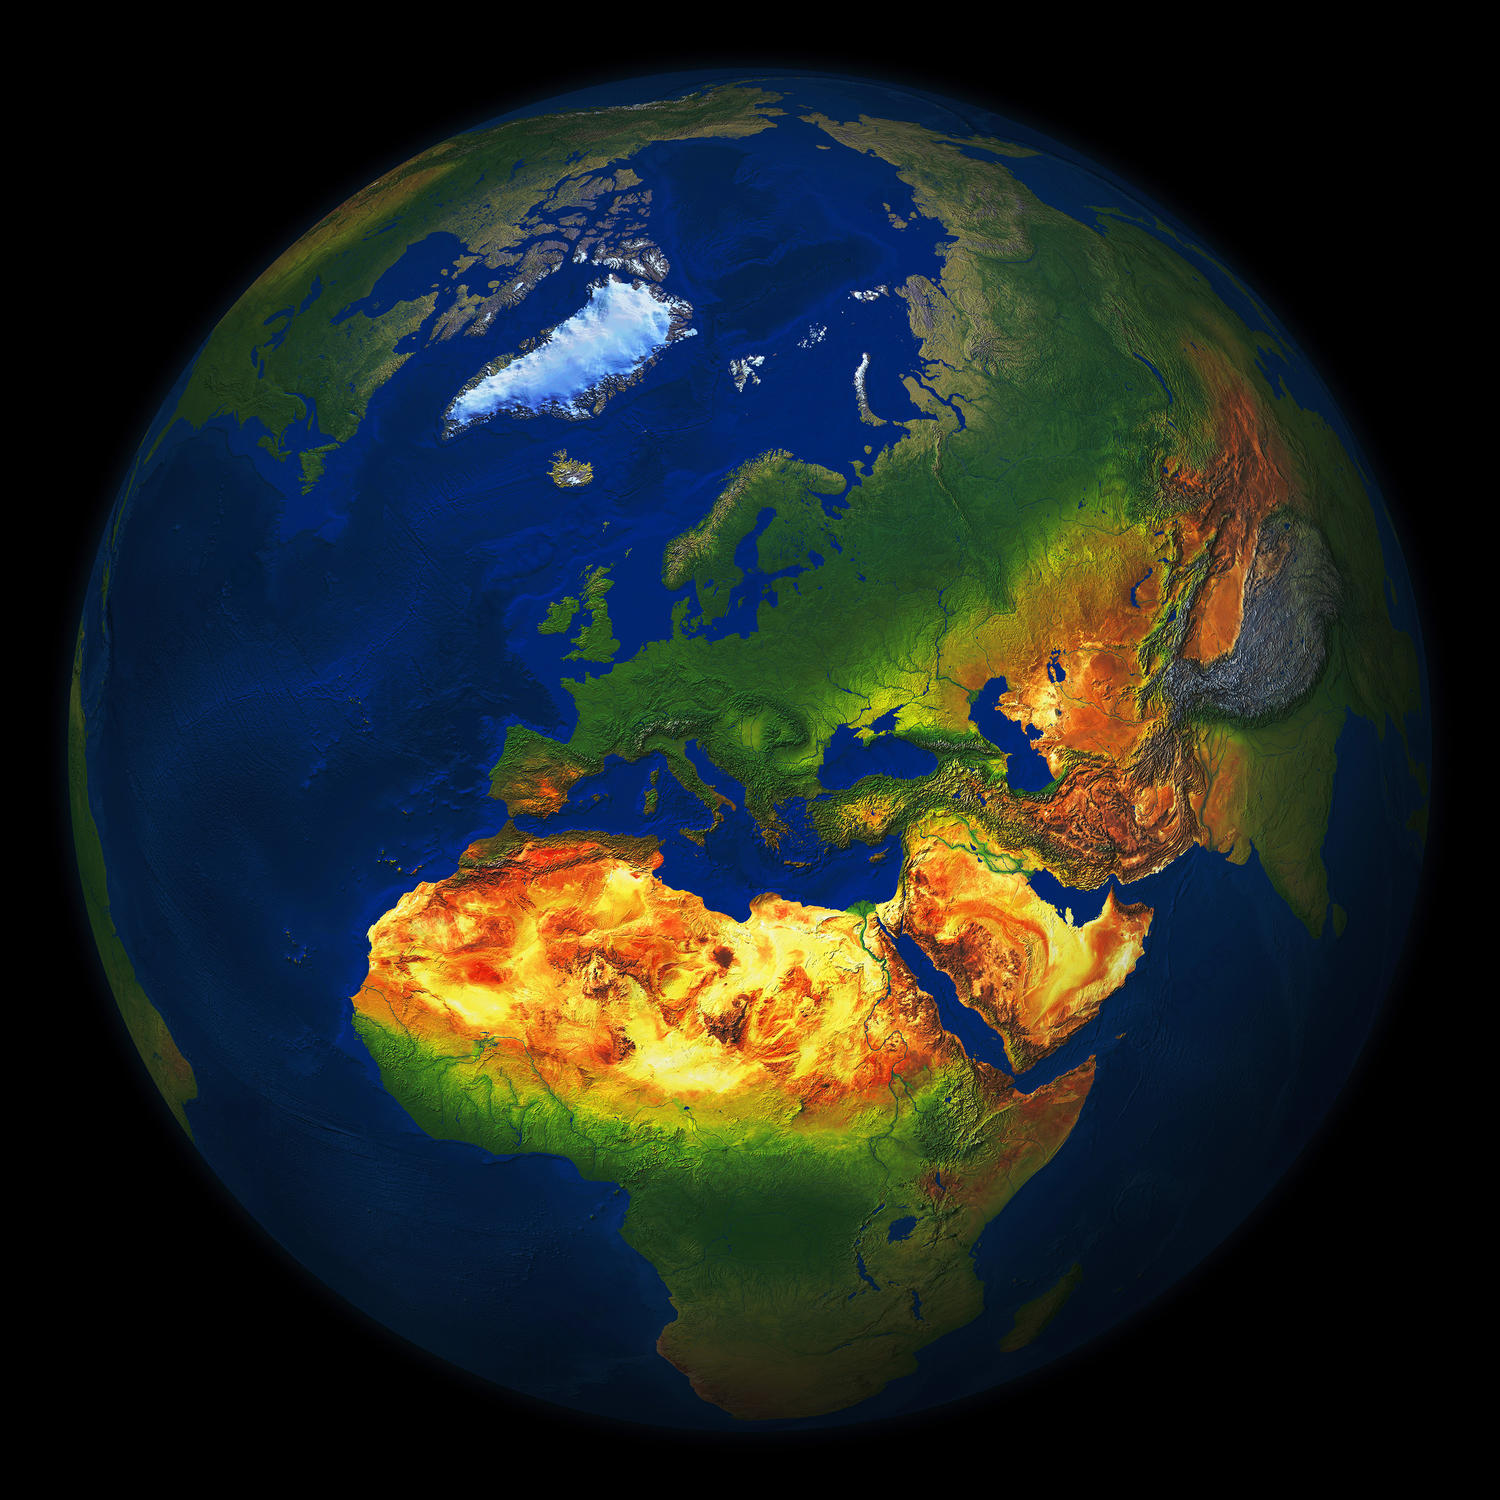 Digital world globe image Europe with relief 